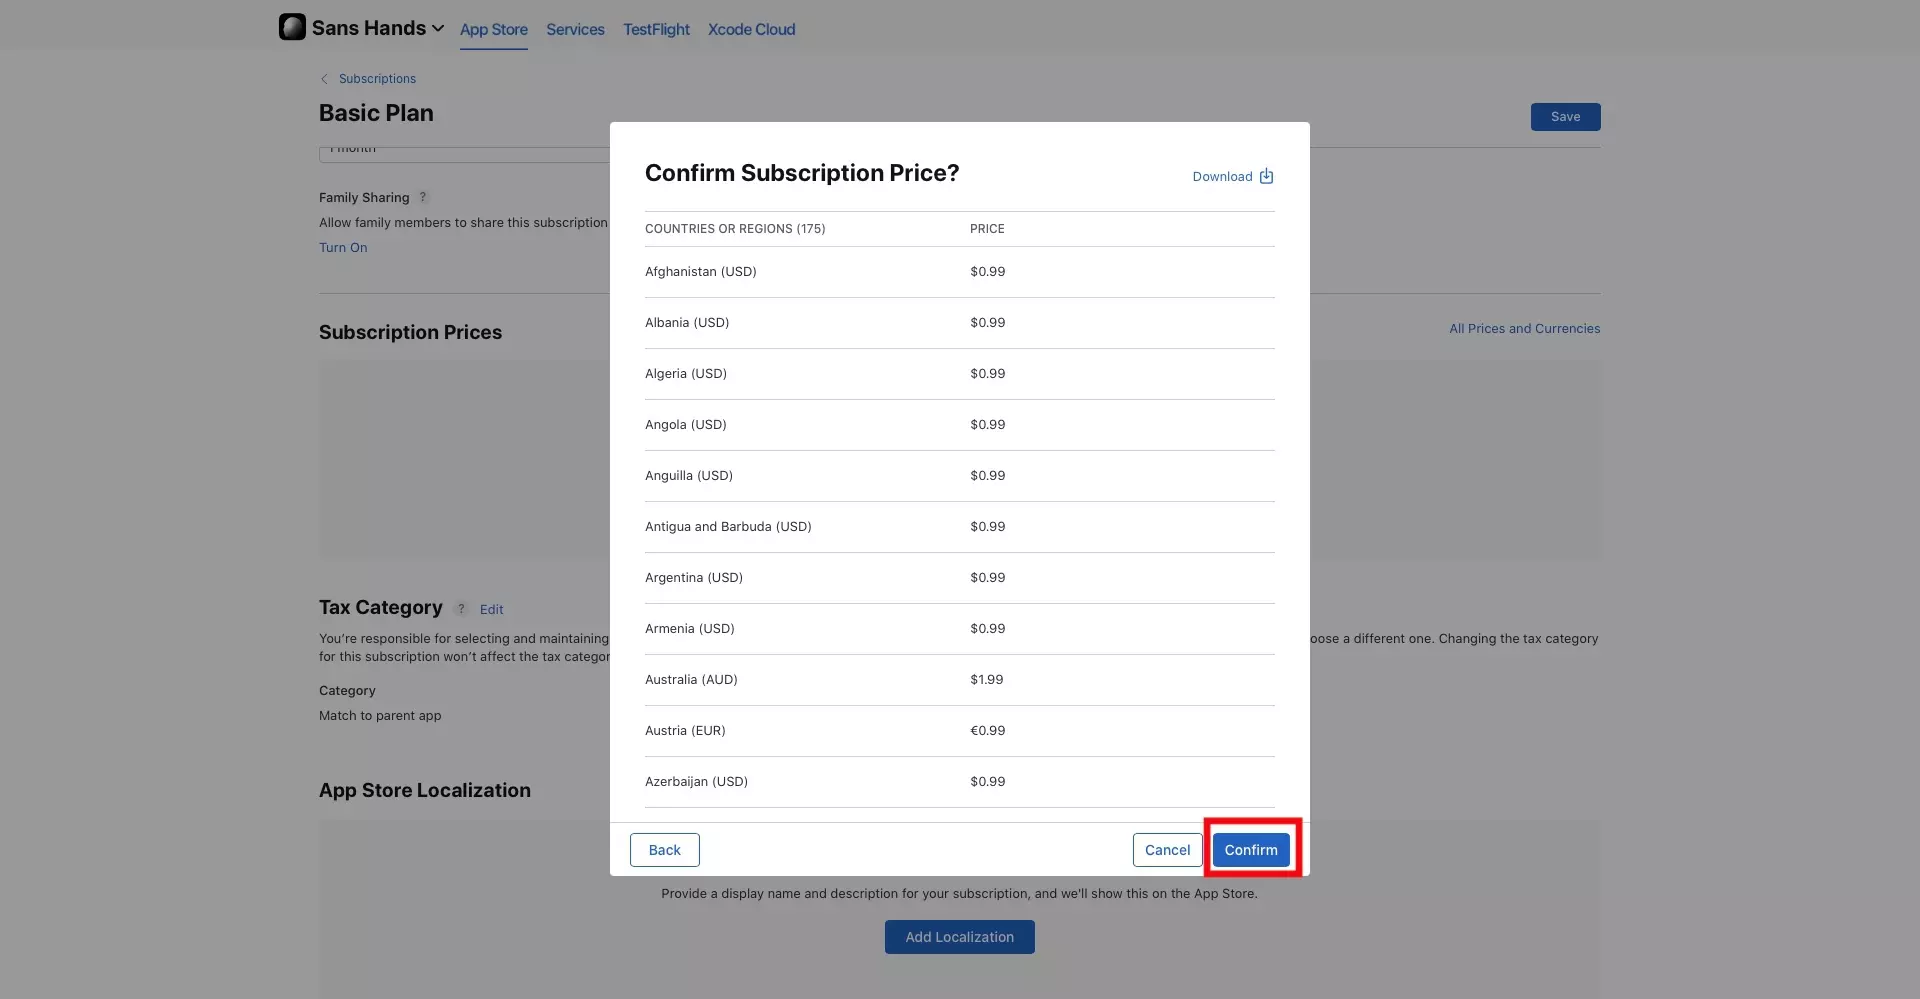 A screenshot of the Confirm Subscription Price? Modal that appears when you press next after setting the prices per country or region. It lists all the prices for each country or region. We have highlighted the Confirm button on the bottom right which you must press if everything looks good.